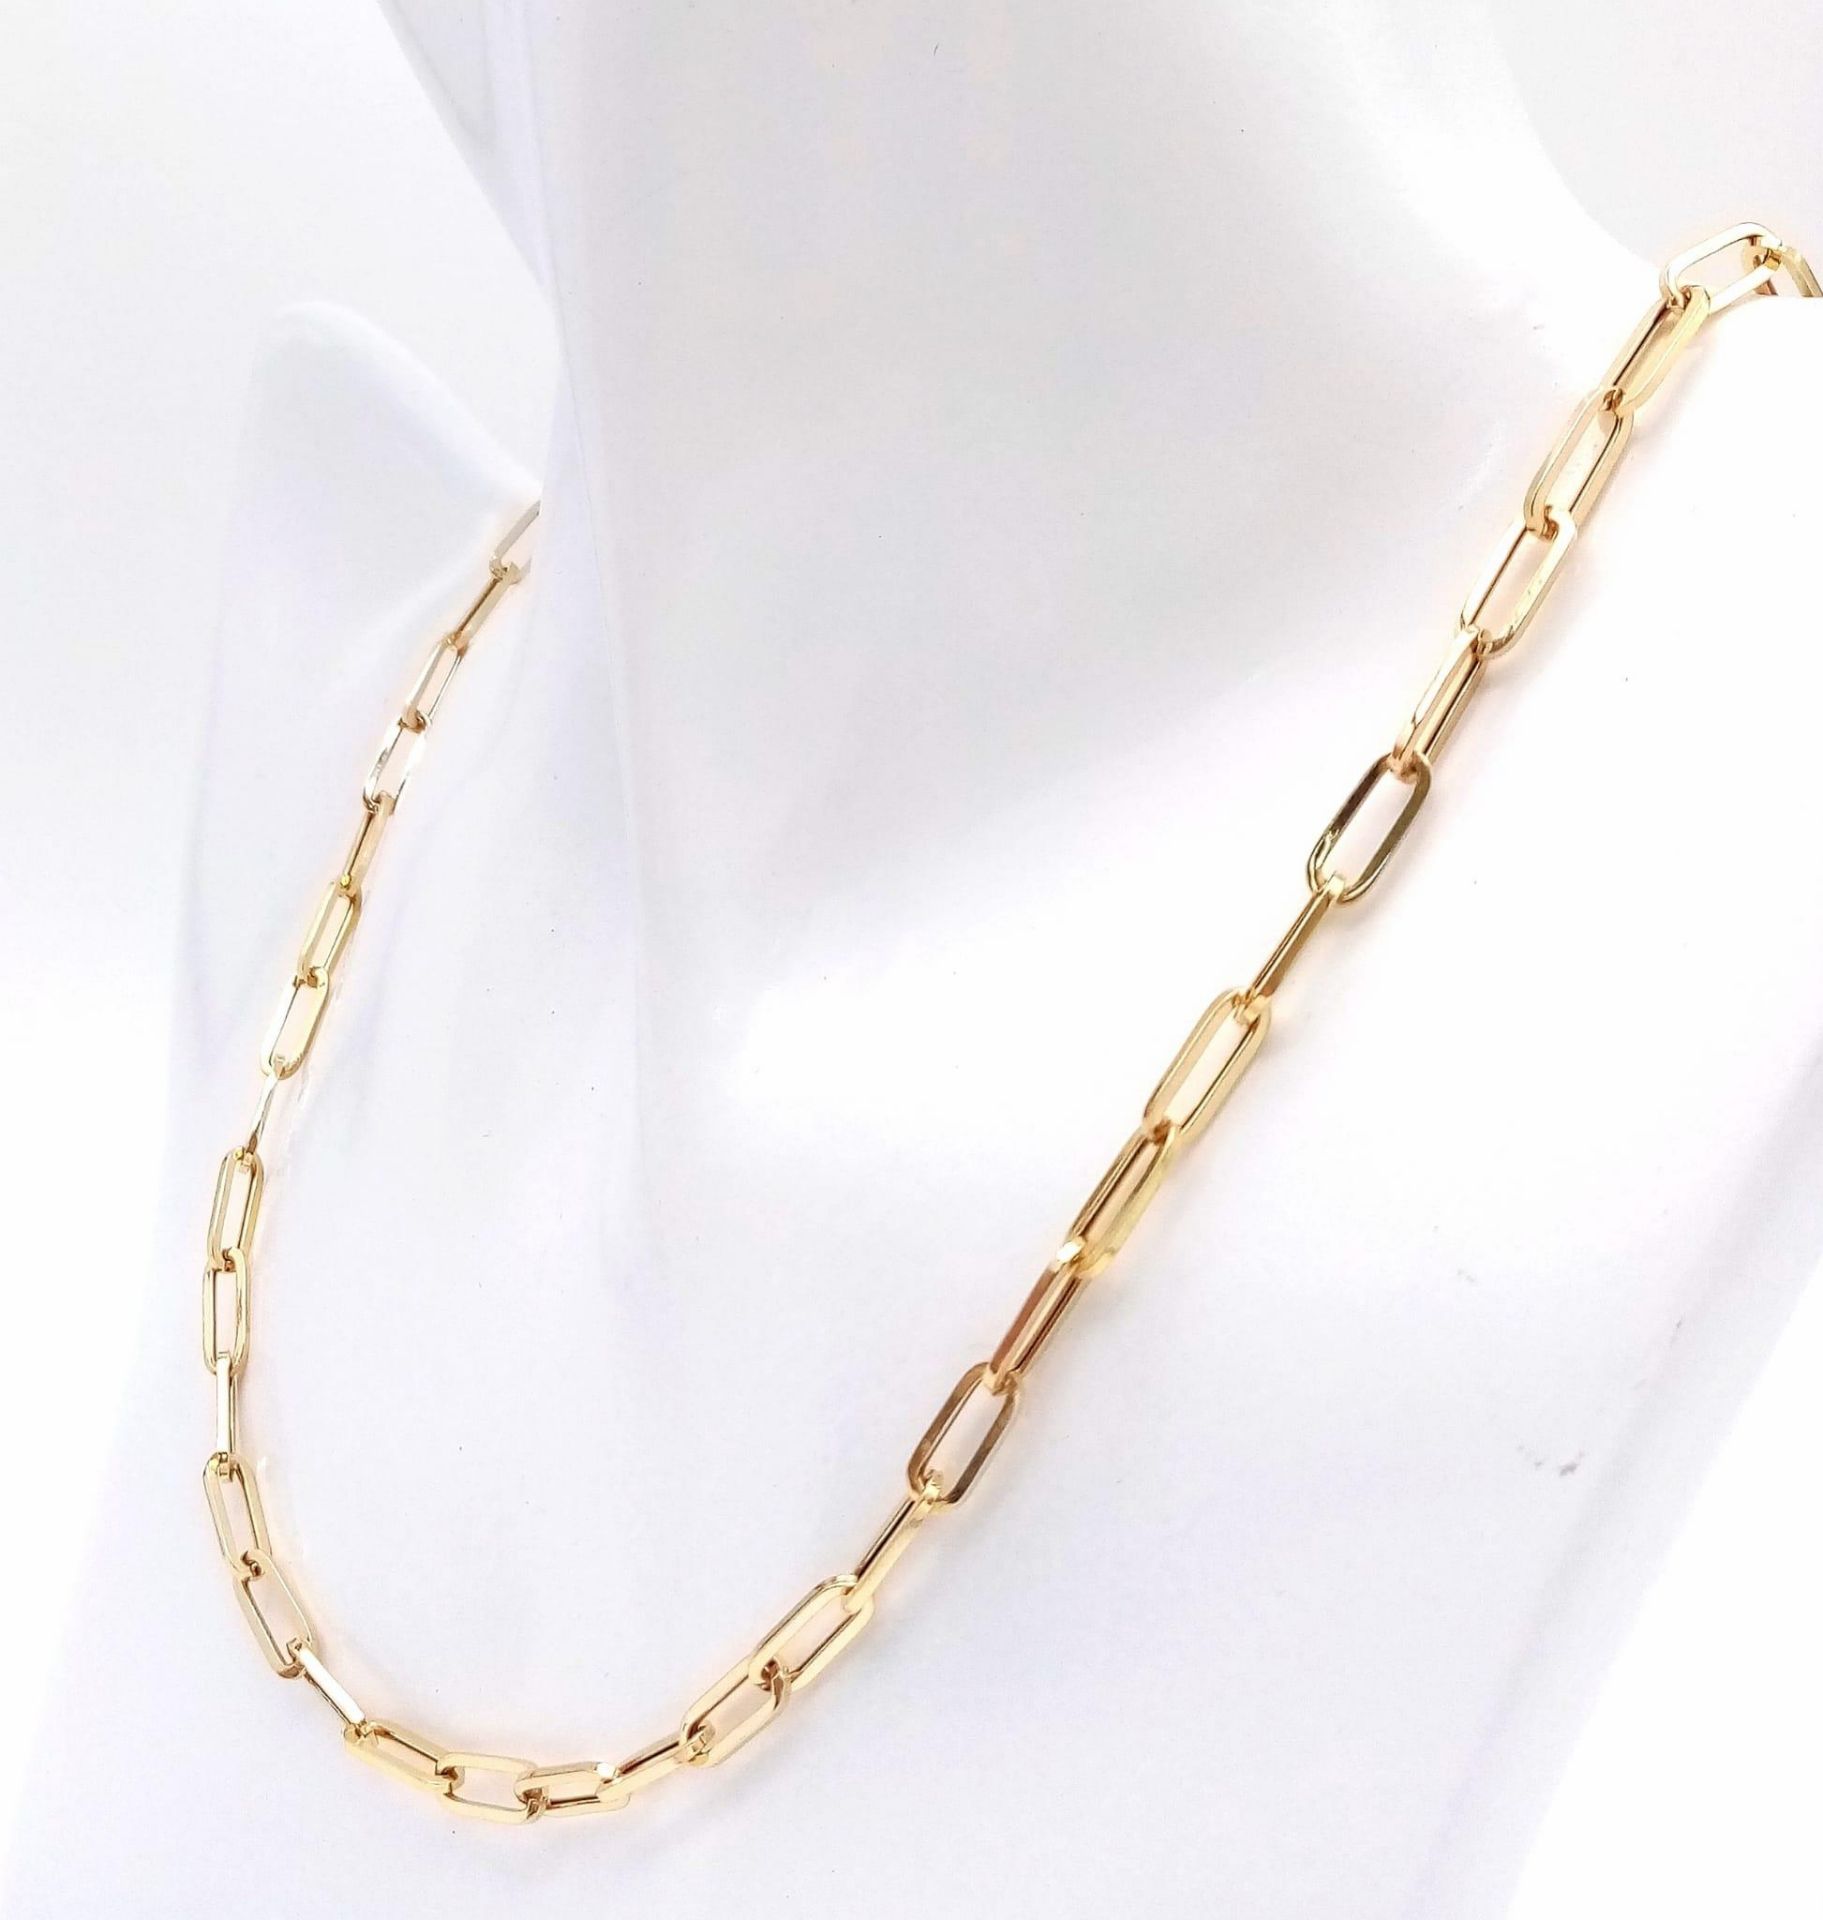 An 18K Yellow Gold Elongated Link Chain. 56cm length. 5.5g weight. - Image 2 of 9